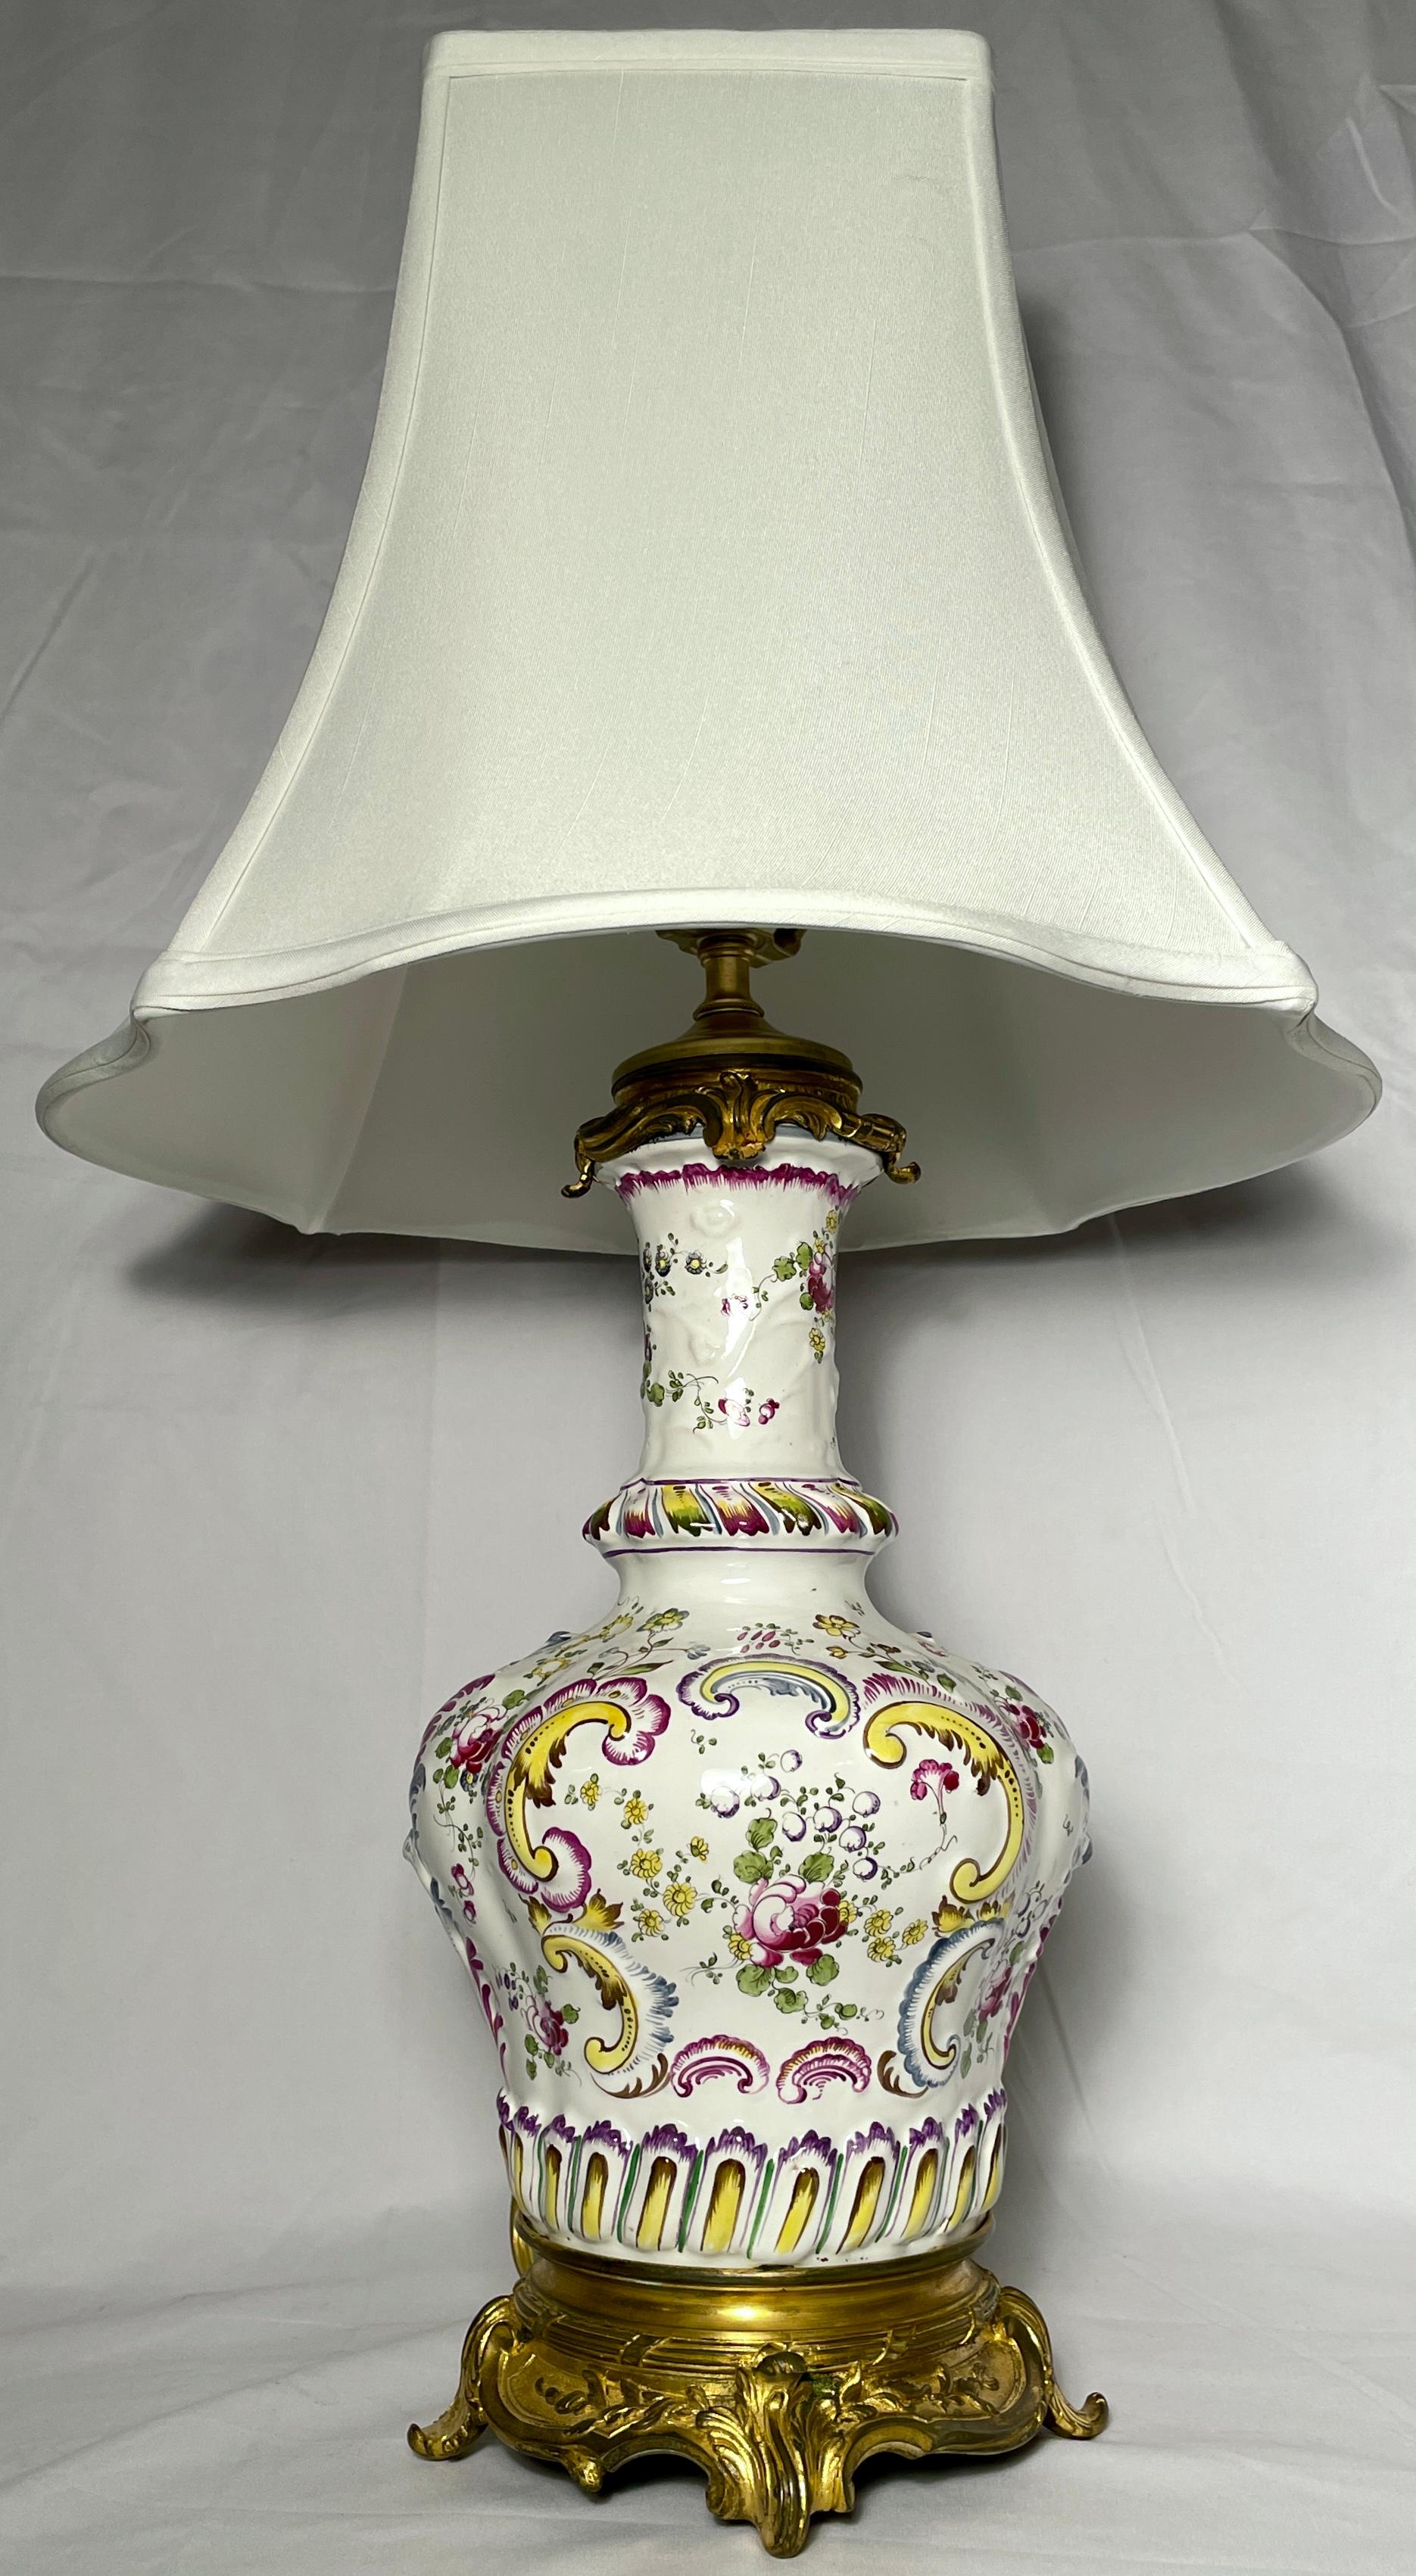 Antique French Porcelain and Gold Bronze Mounted Lamps, Circa 1890.